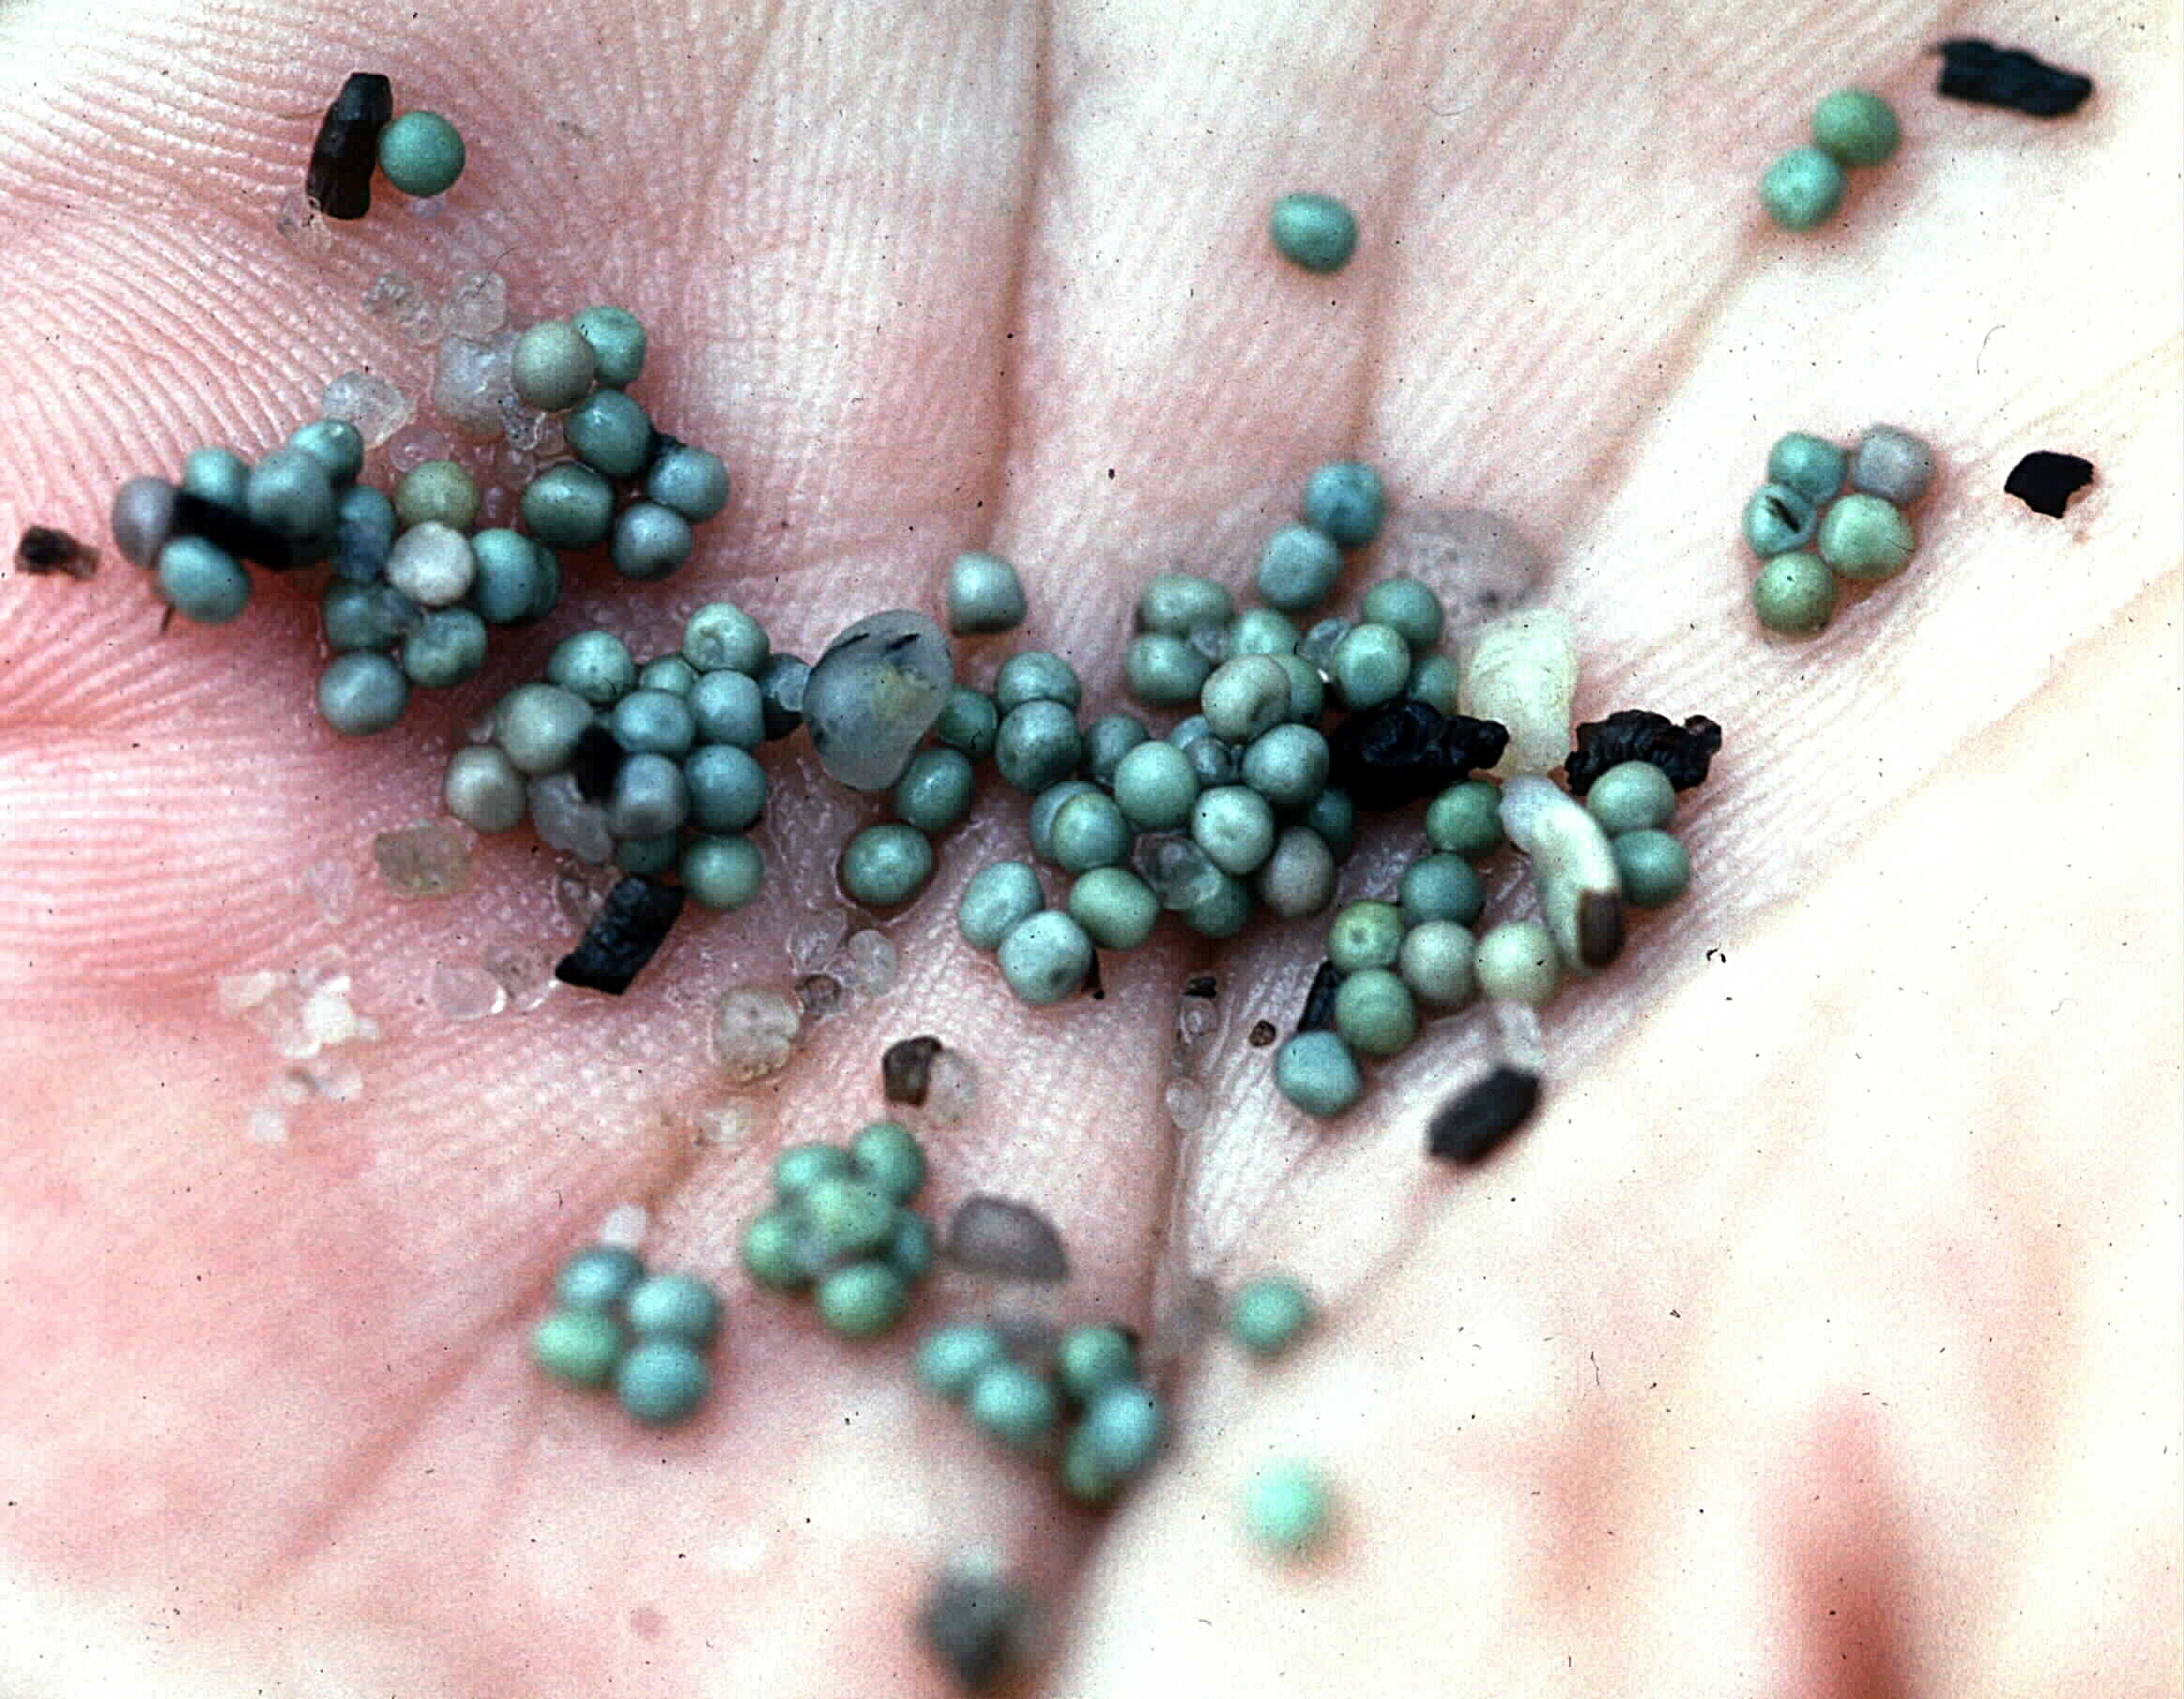 dozens on tiny blue eggs in the palm of a hand